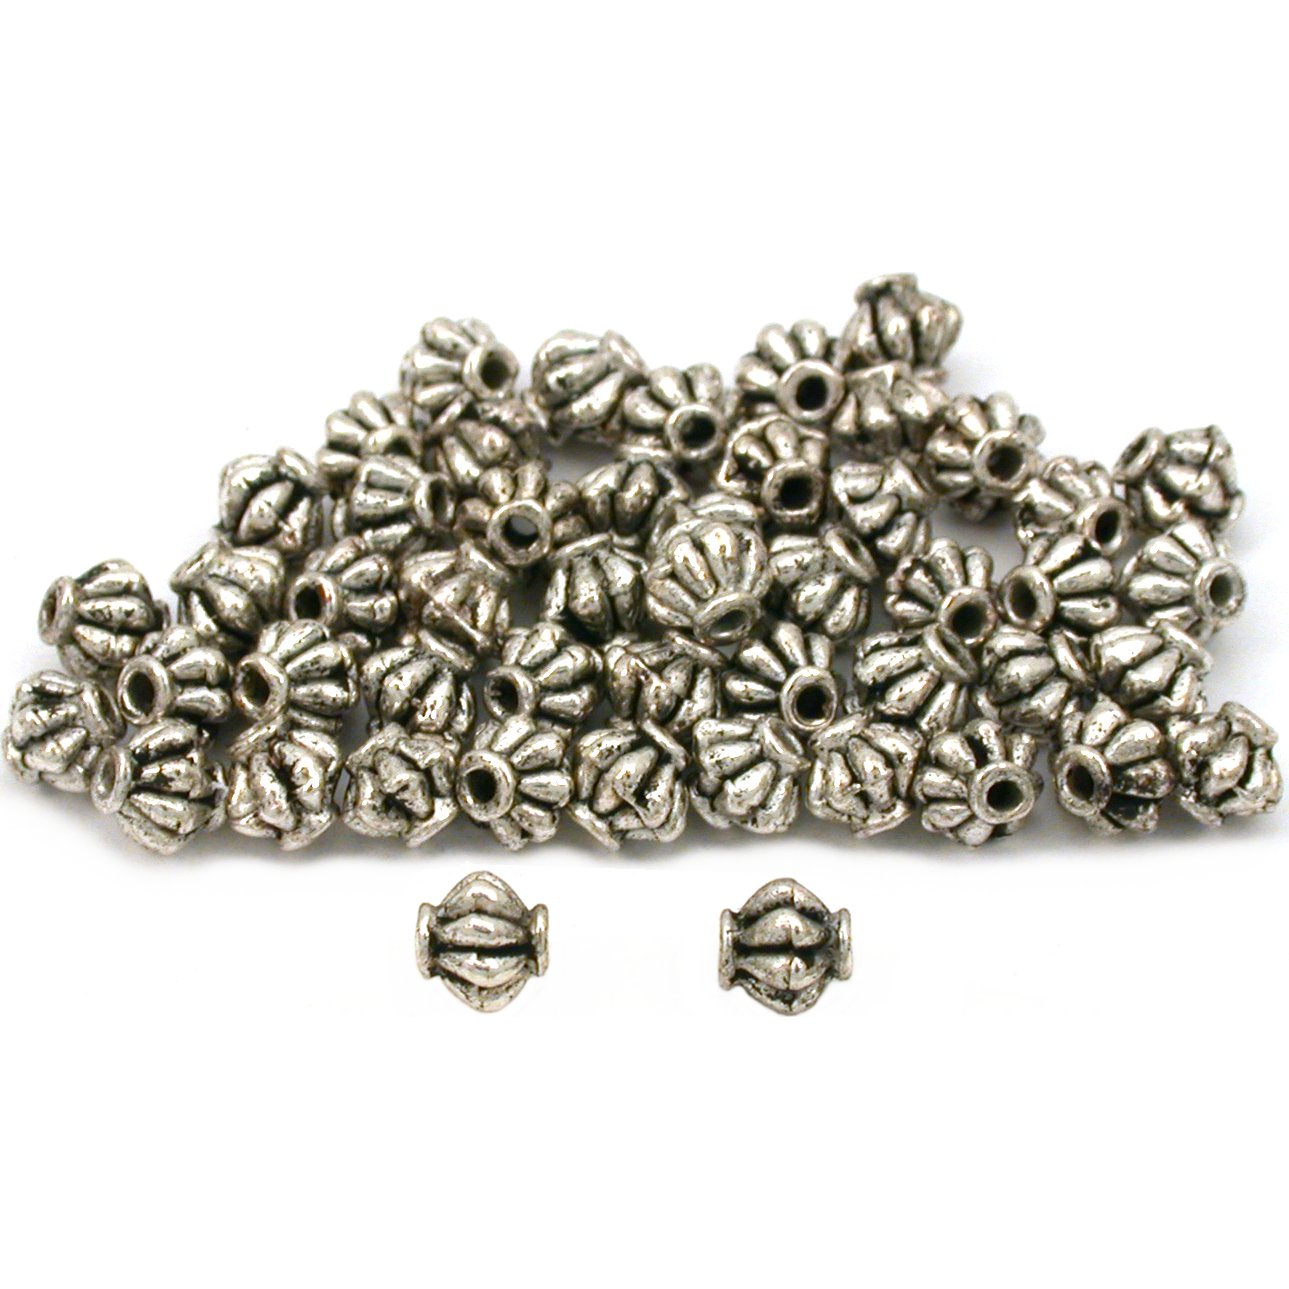 Bali Fluted Beads Antique Silver Plated 5mm 50Pcs Approx.